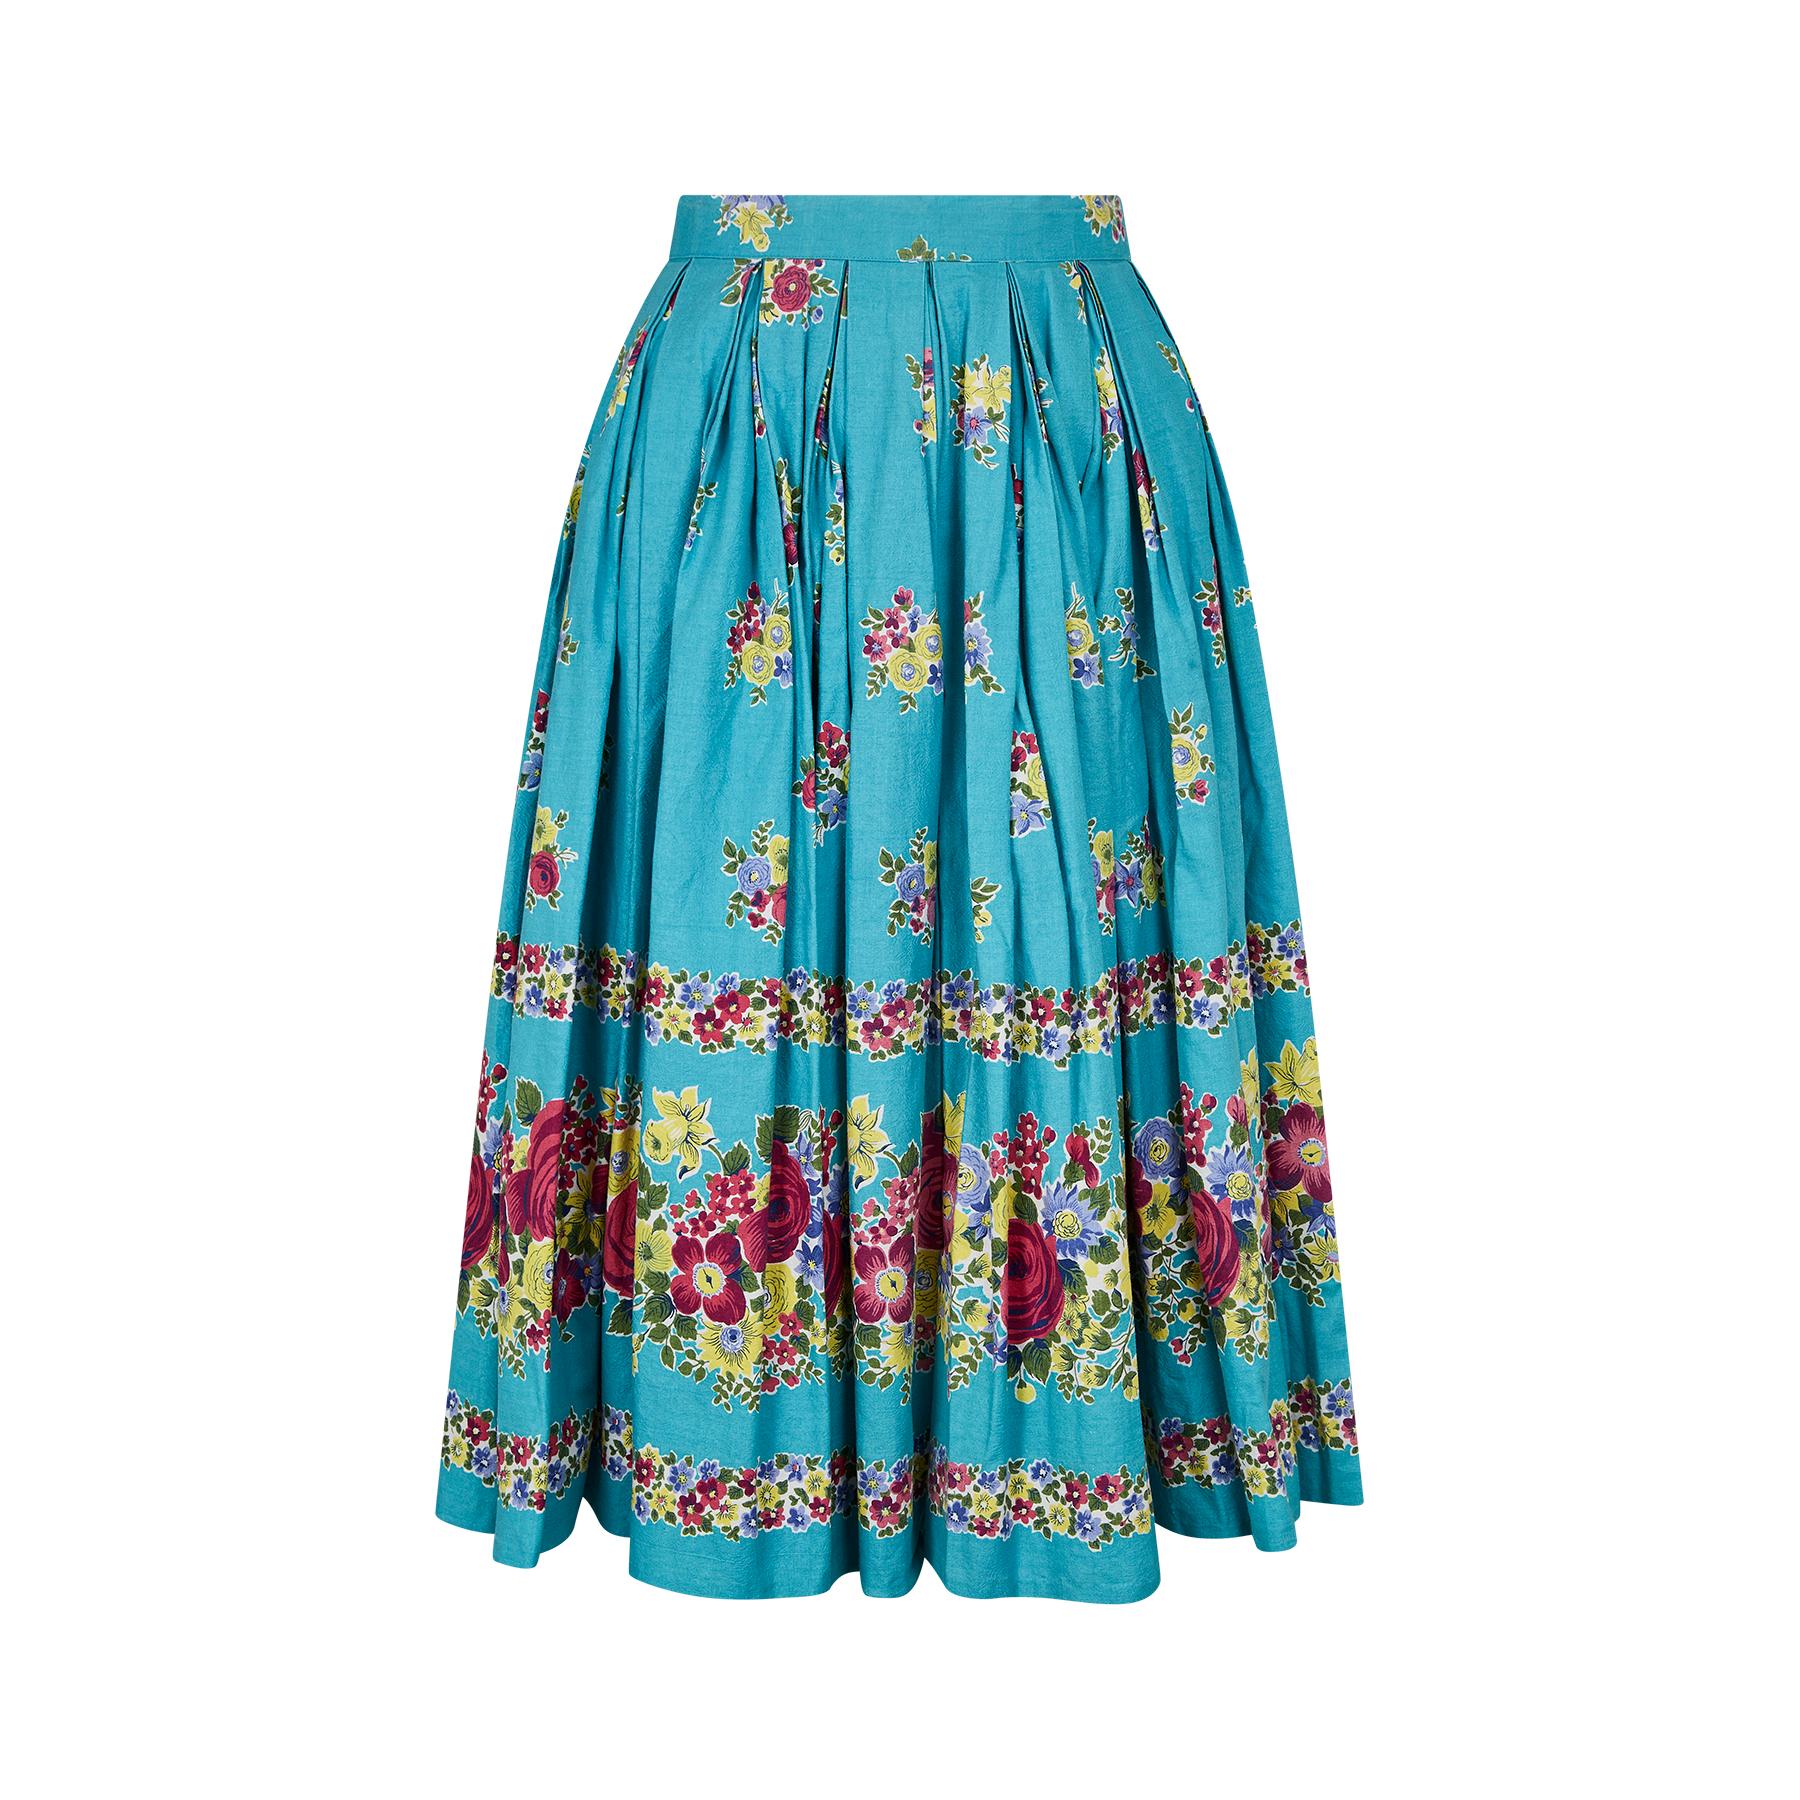 This is the most darling original vintage 1950s floral cotton box pleated skirt. In a vivid turquoise blue base colour which is set off with a striking floral pattern that has several size versions combining in various forms to provide a graduated